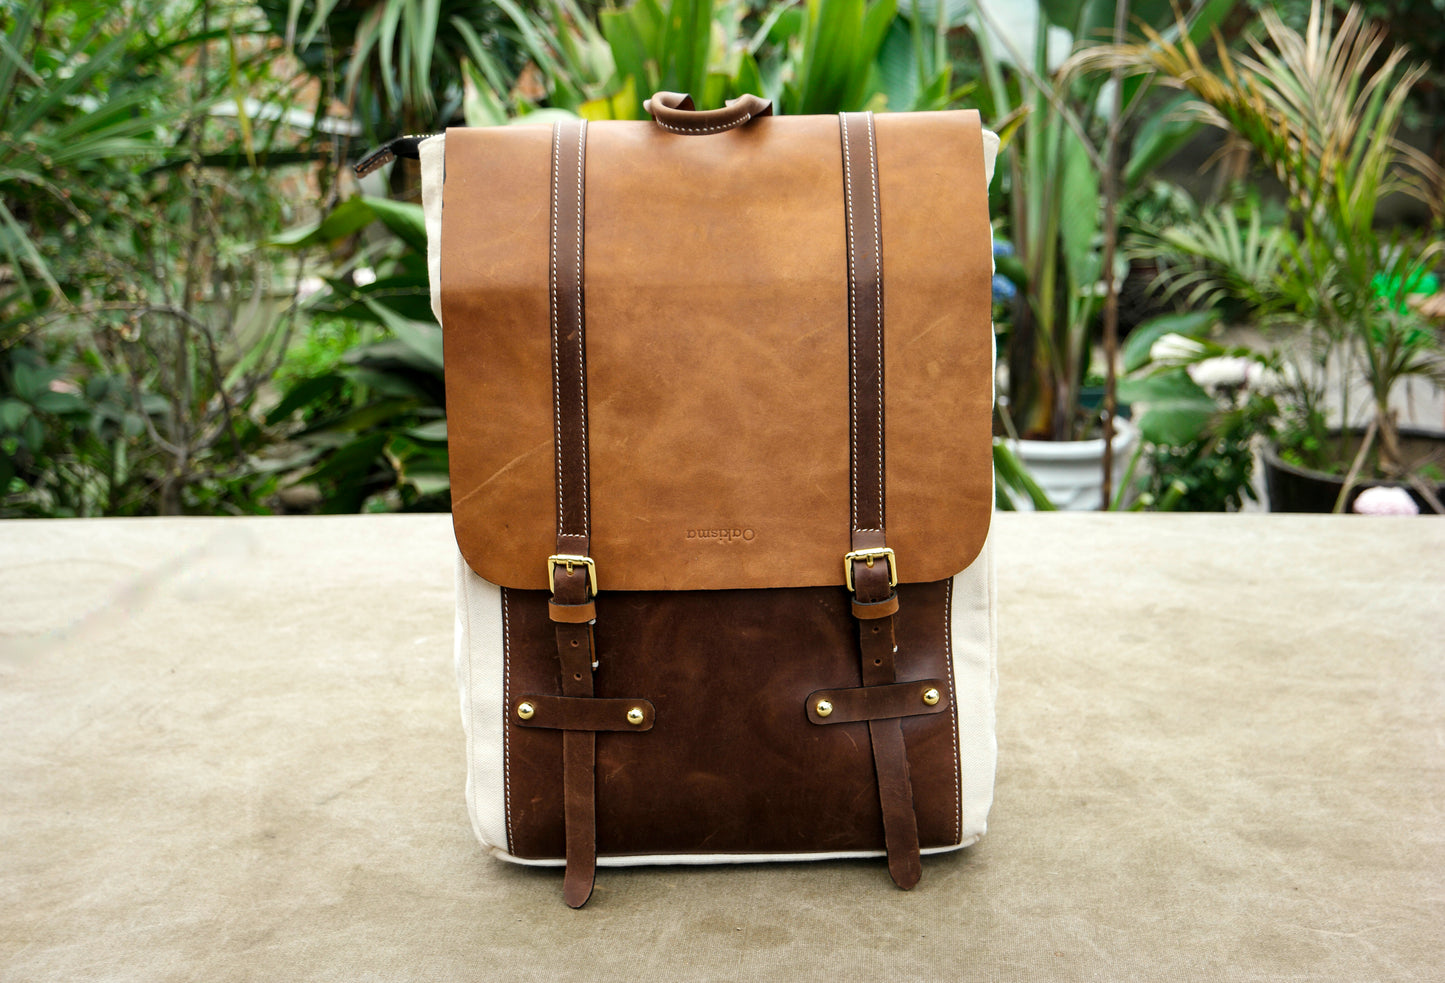 【Bag Pattern】Making a Leather Backpack,Making vegetable tanned leather briefcase,Classic Leather Backpack